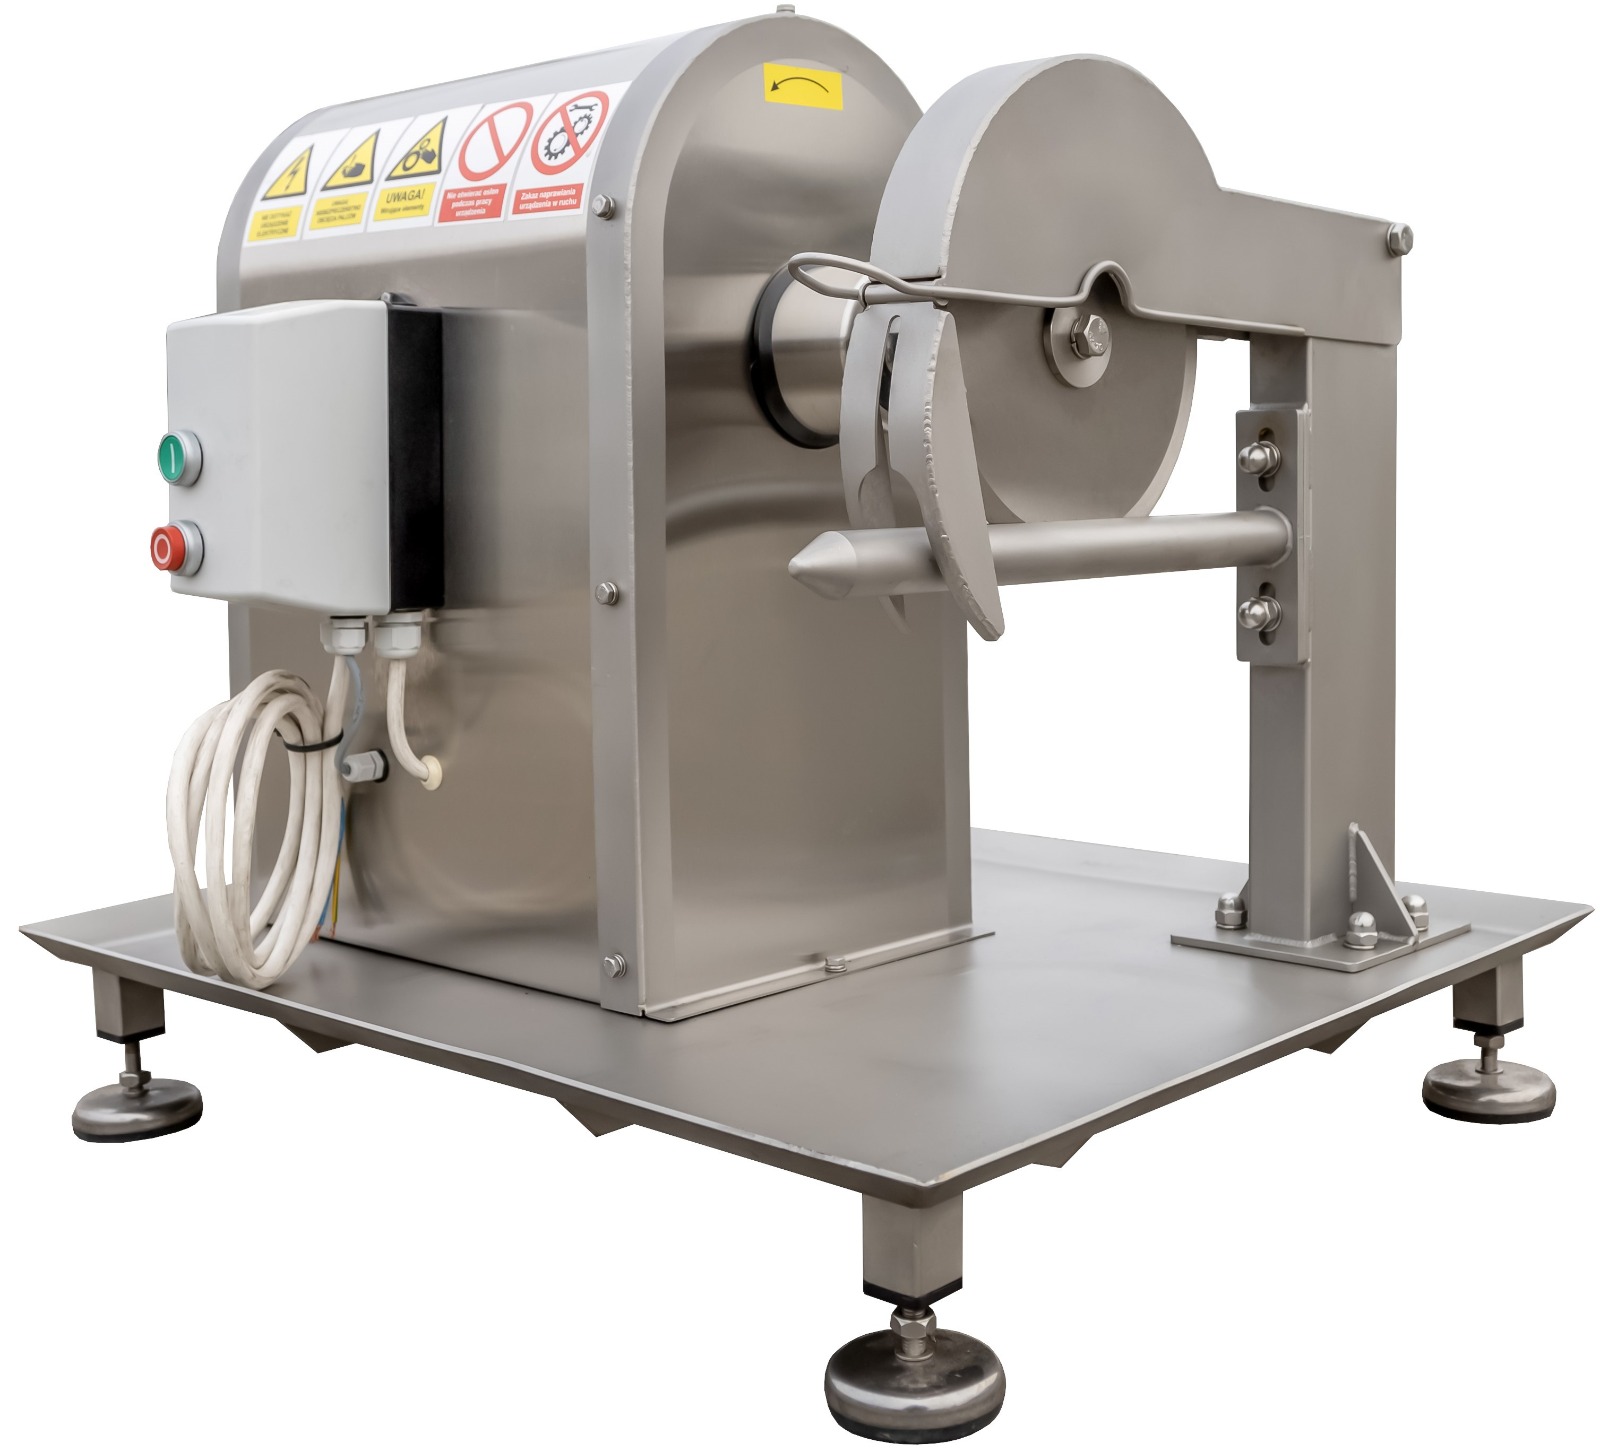 https://www.poultryprocessingequipment.com/cut_up_and_portioning_systems/images/Chicken_portioning_saw_02.jpg